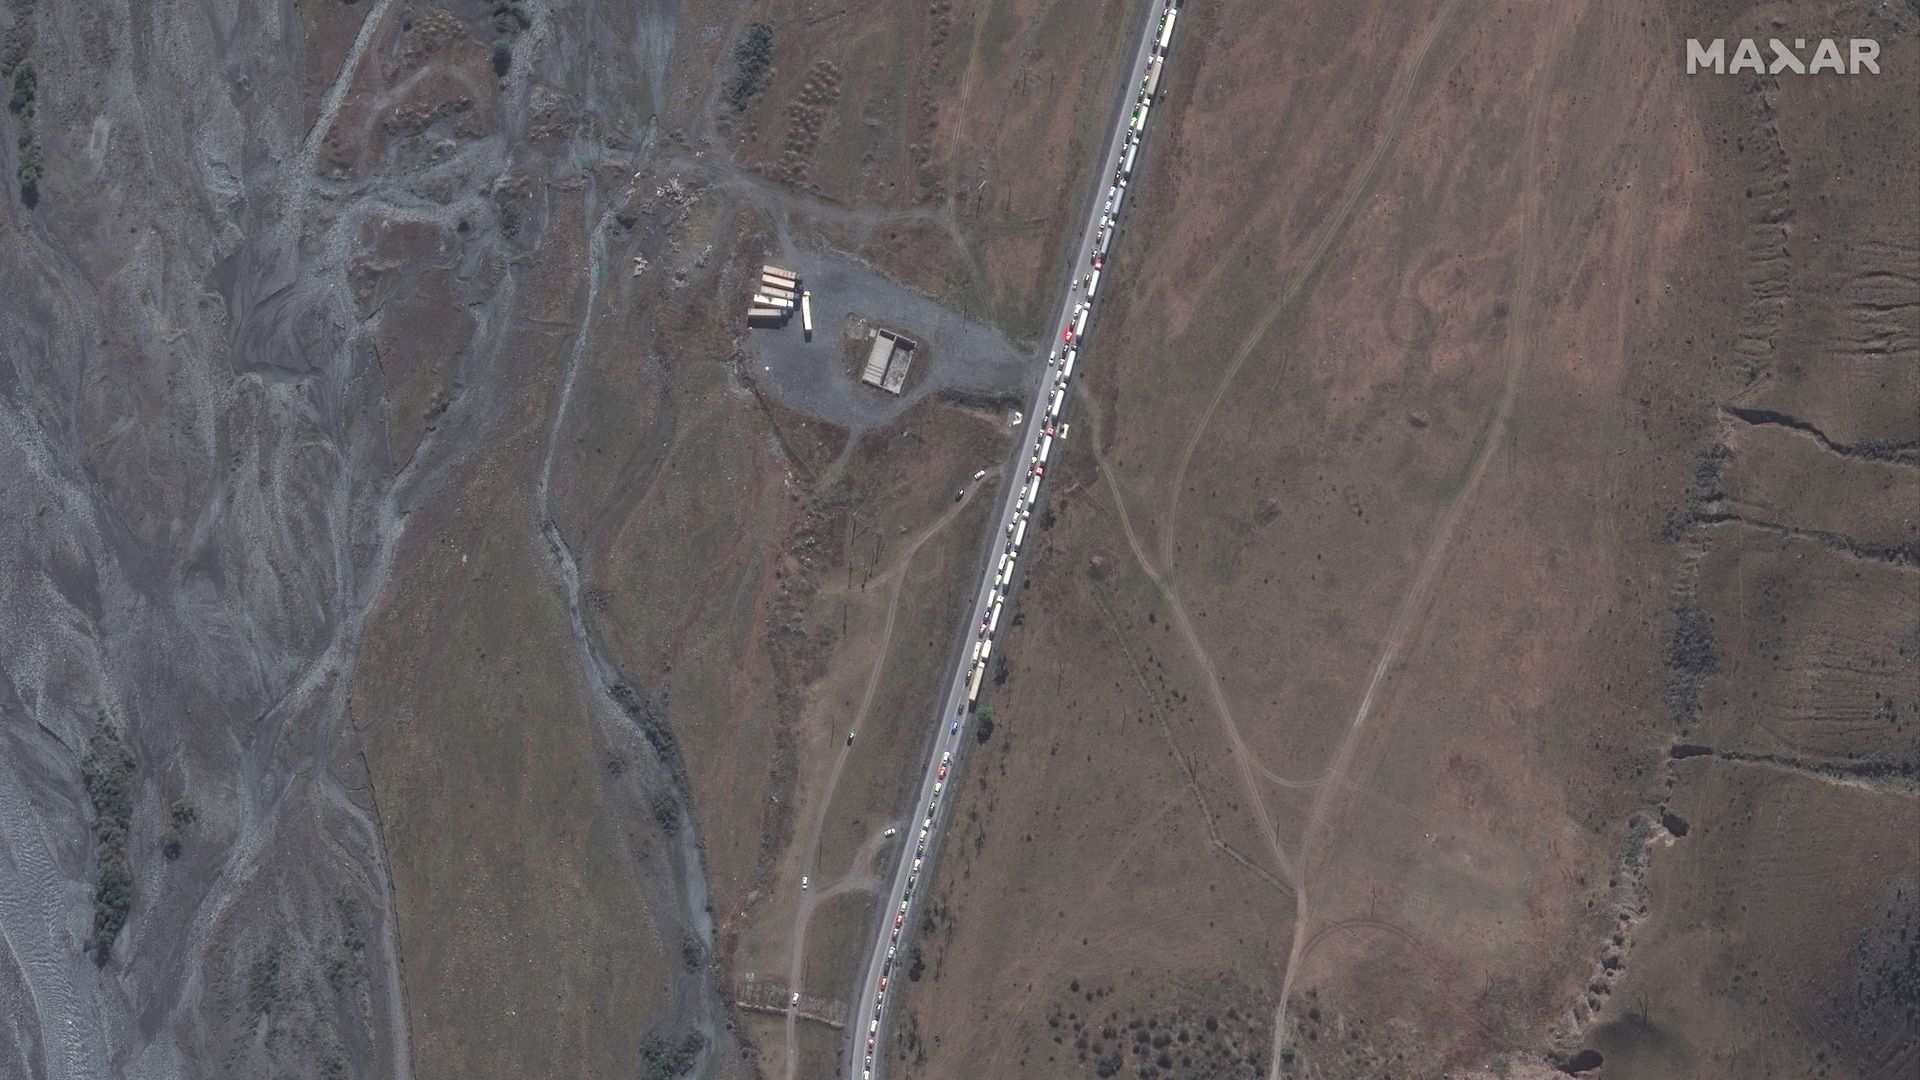 A satellite image showing the large traffic jam of trucks and cars waiting to cross the border into Georgia.